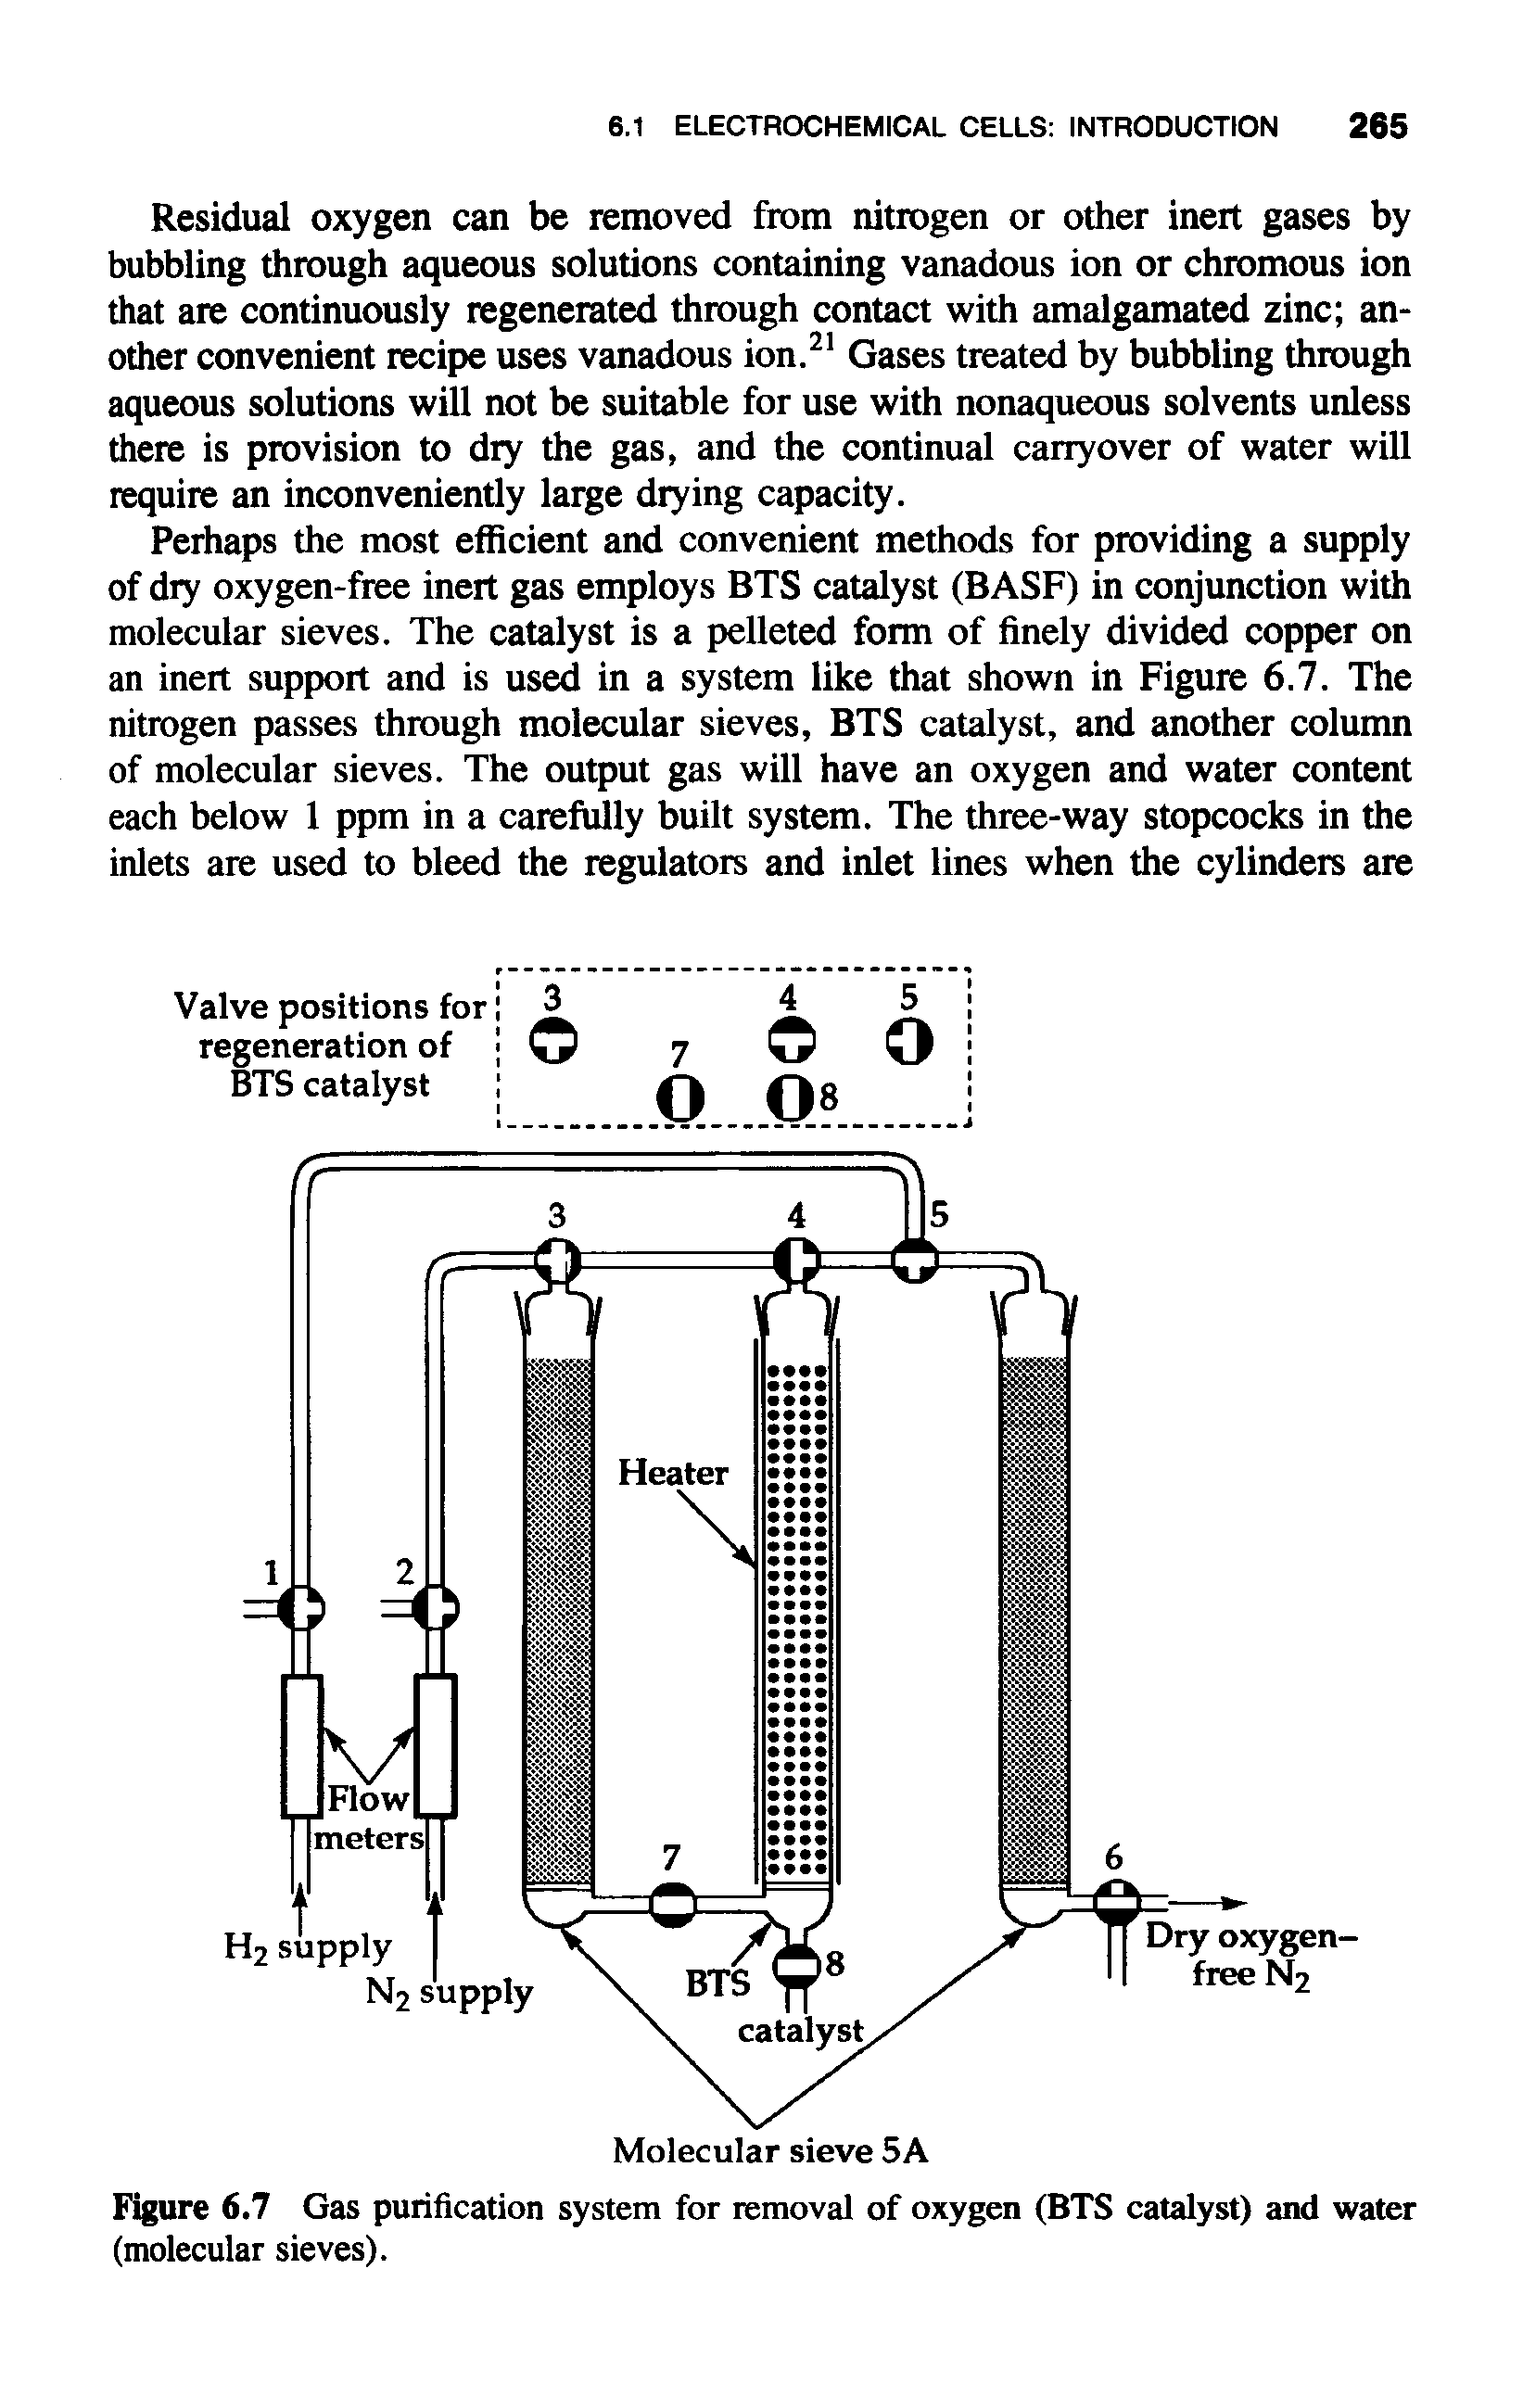 Figure 6.7 Gas purification system for removal of oxygen (BTS catalyst) and water (molecular sieves).